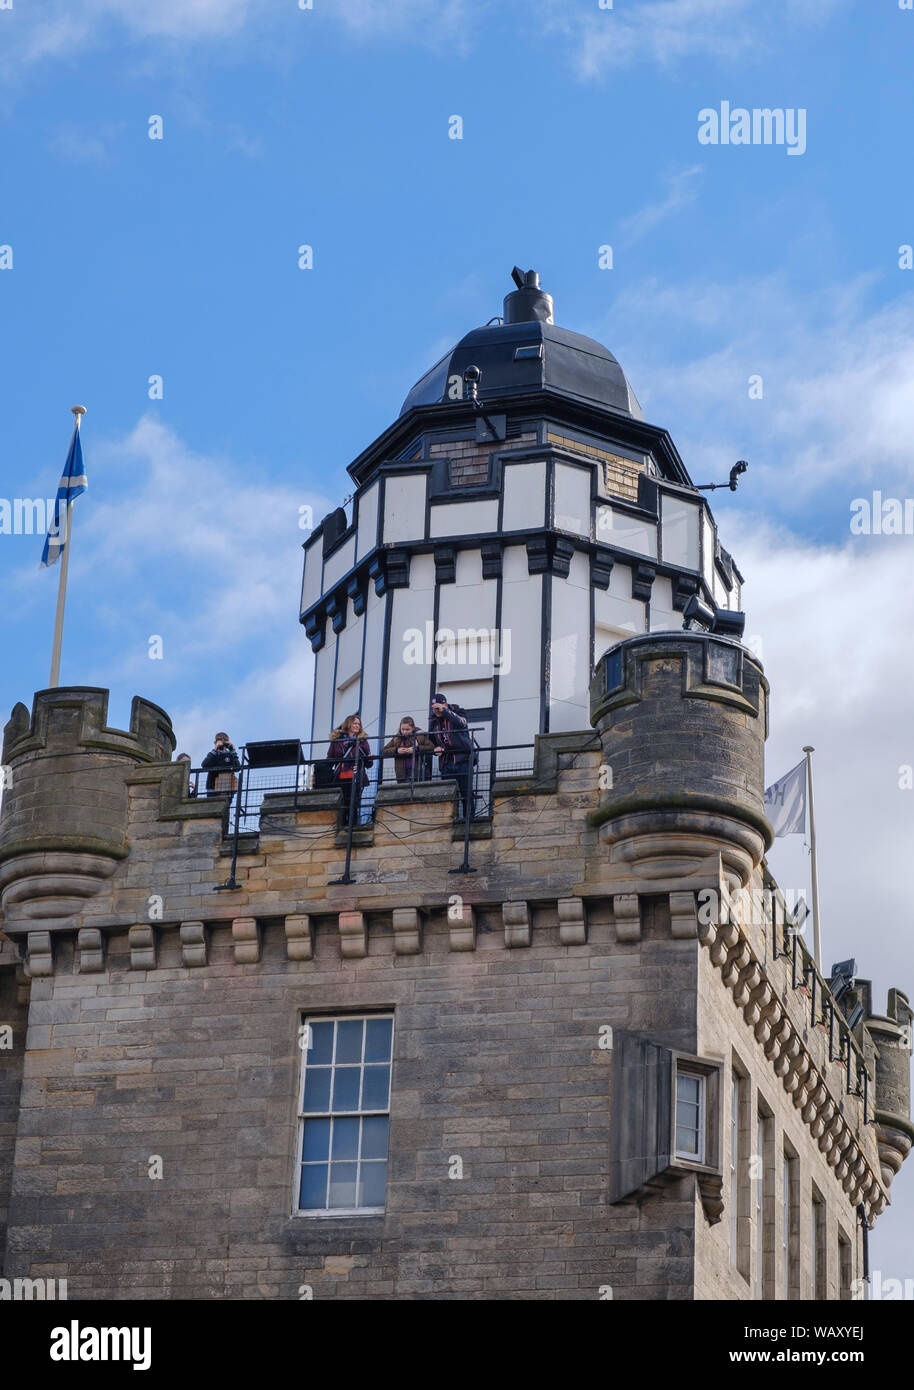 Tourists at top of the Camera Obscura tower a famous visitor attraction in the Castle Hill section of Royal Mile, Old Town, Edinburgh Stock Photo